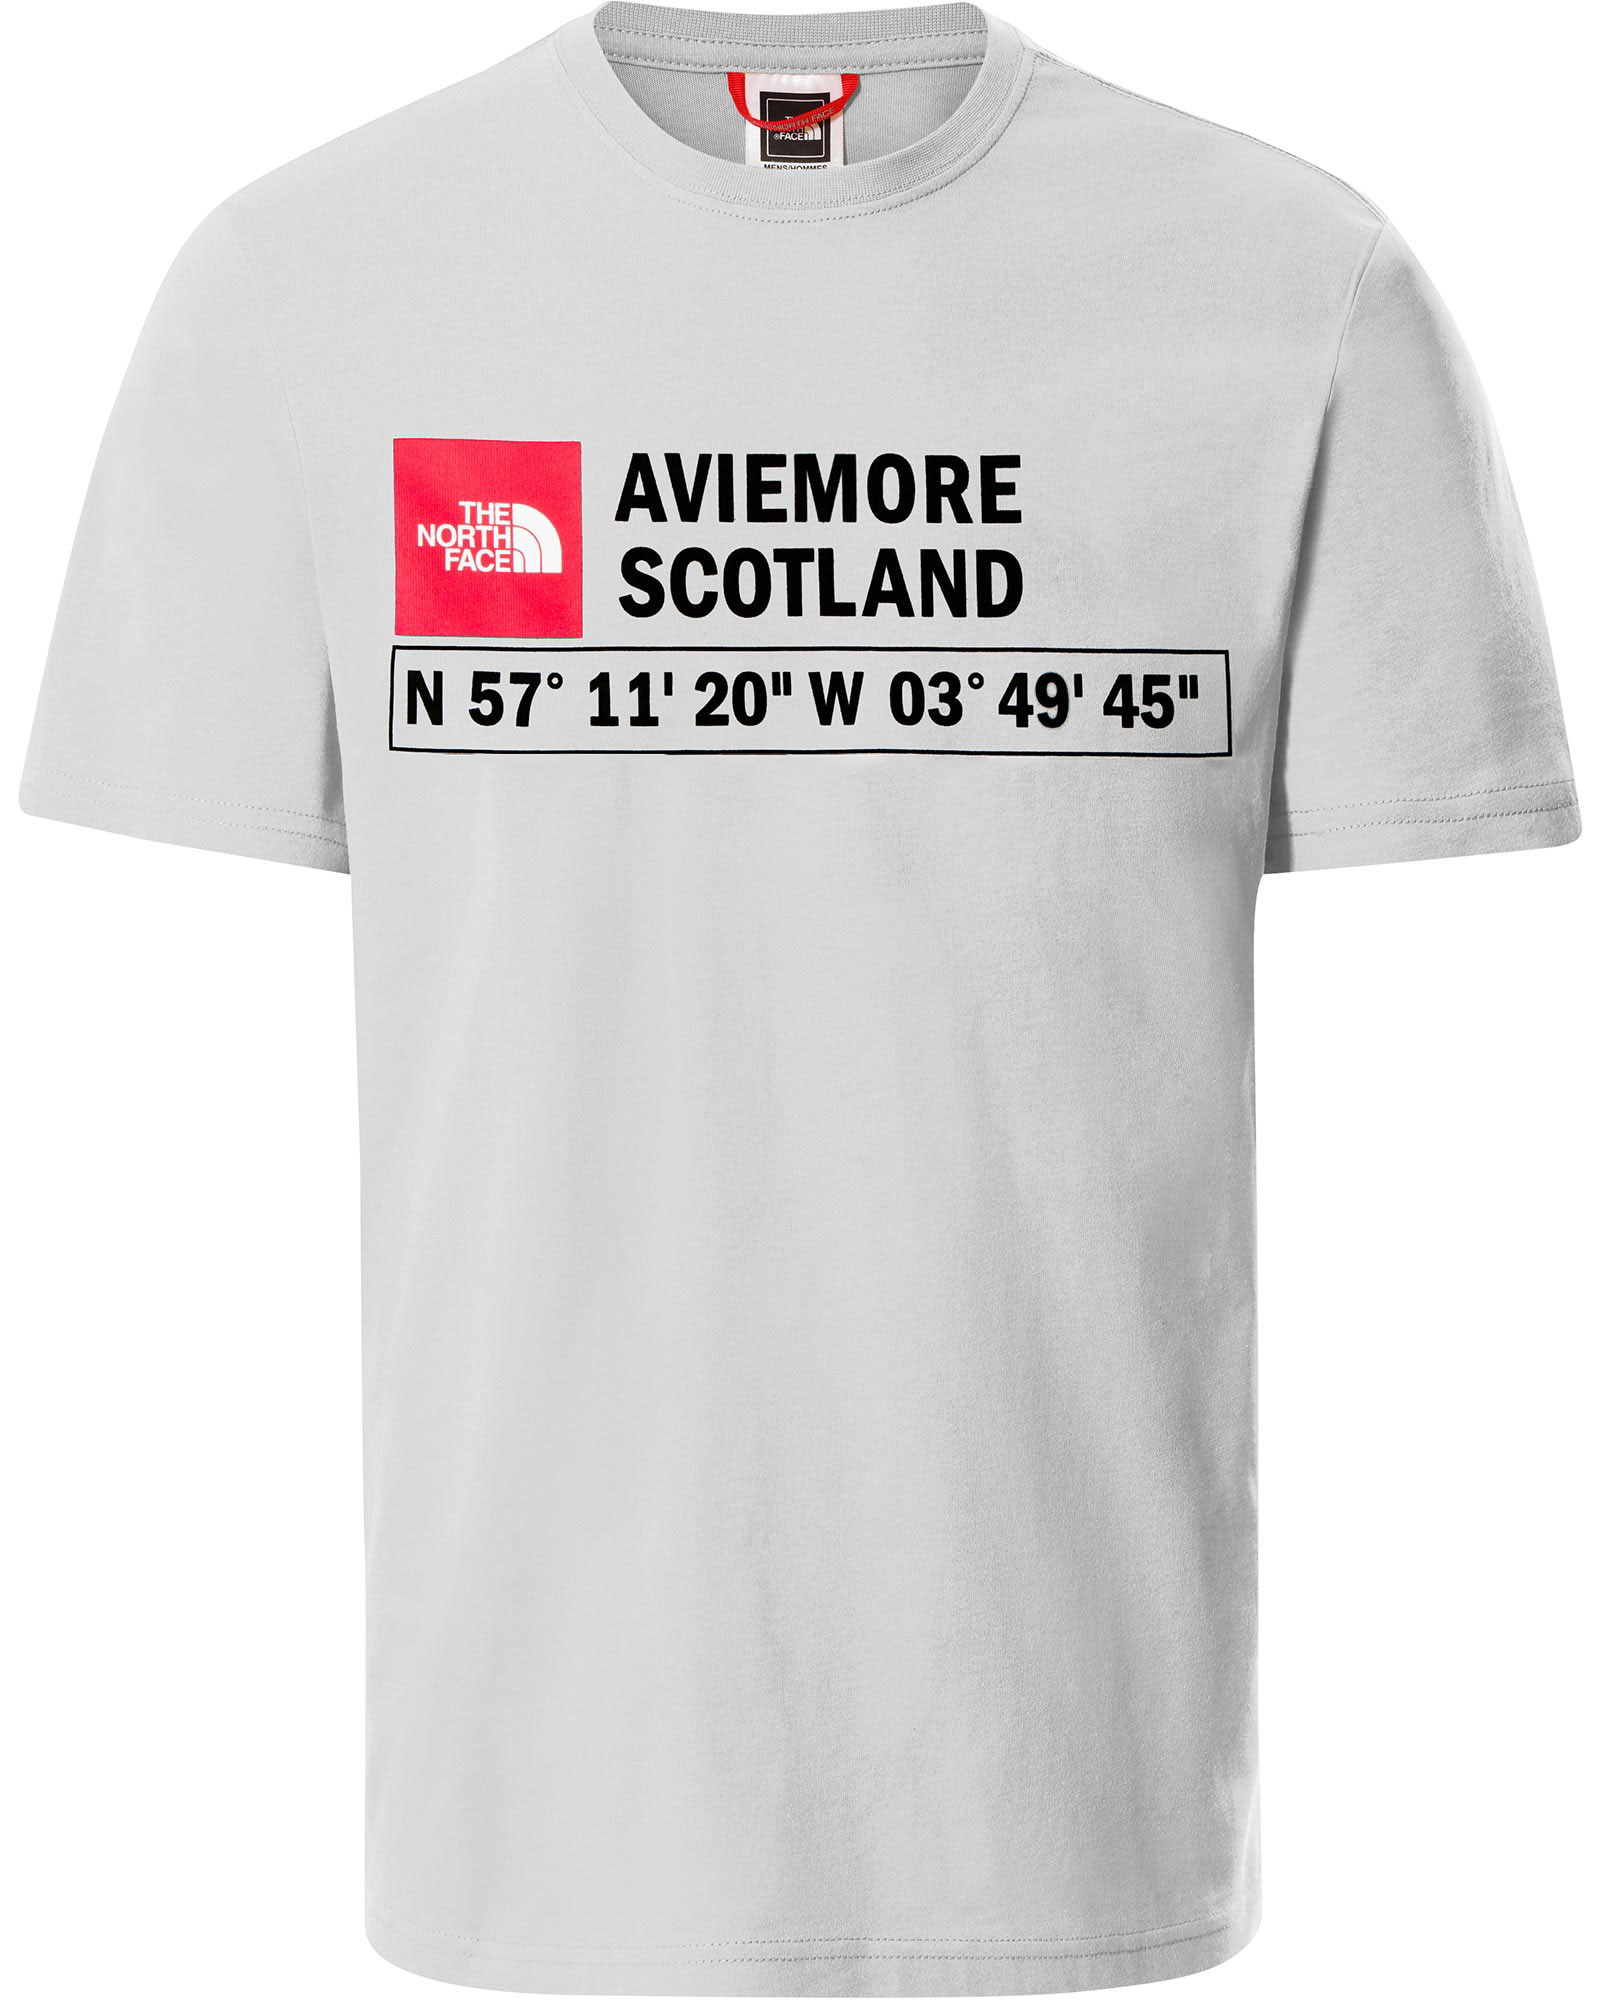 Product image of The North Face GPS Logo Men's T-Shirt Aviemore